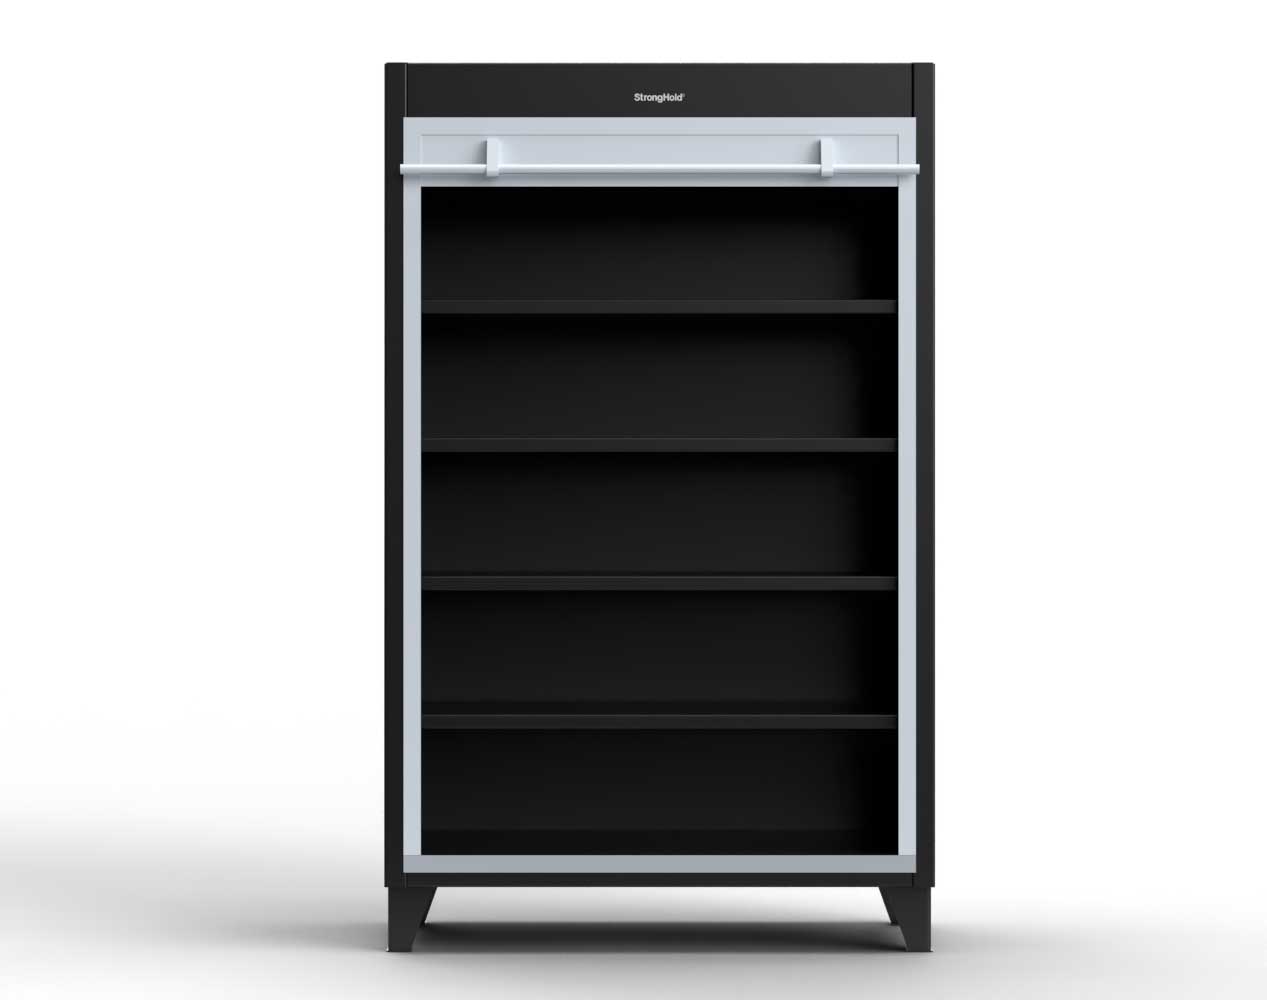 Extreme Duty 12 GA Cabinet with Roll-Up Door, 4 Shelves - 48 In. W x 24 In. D x 78 In. H